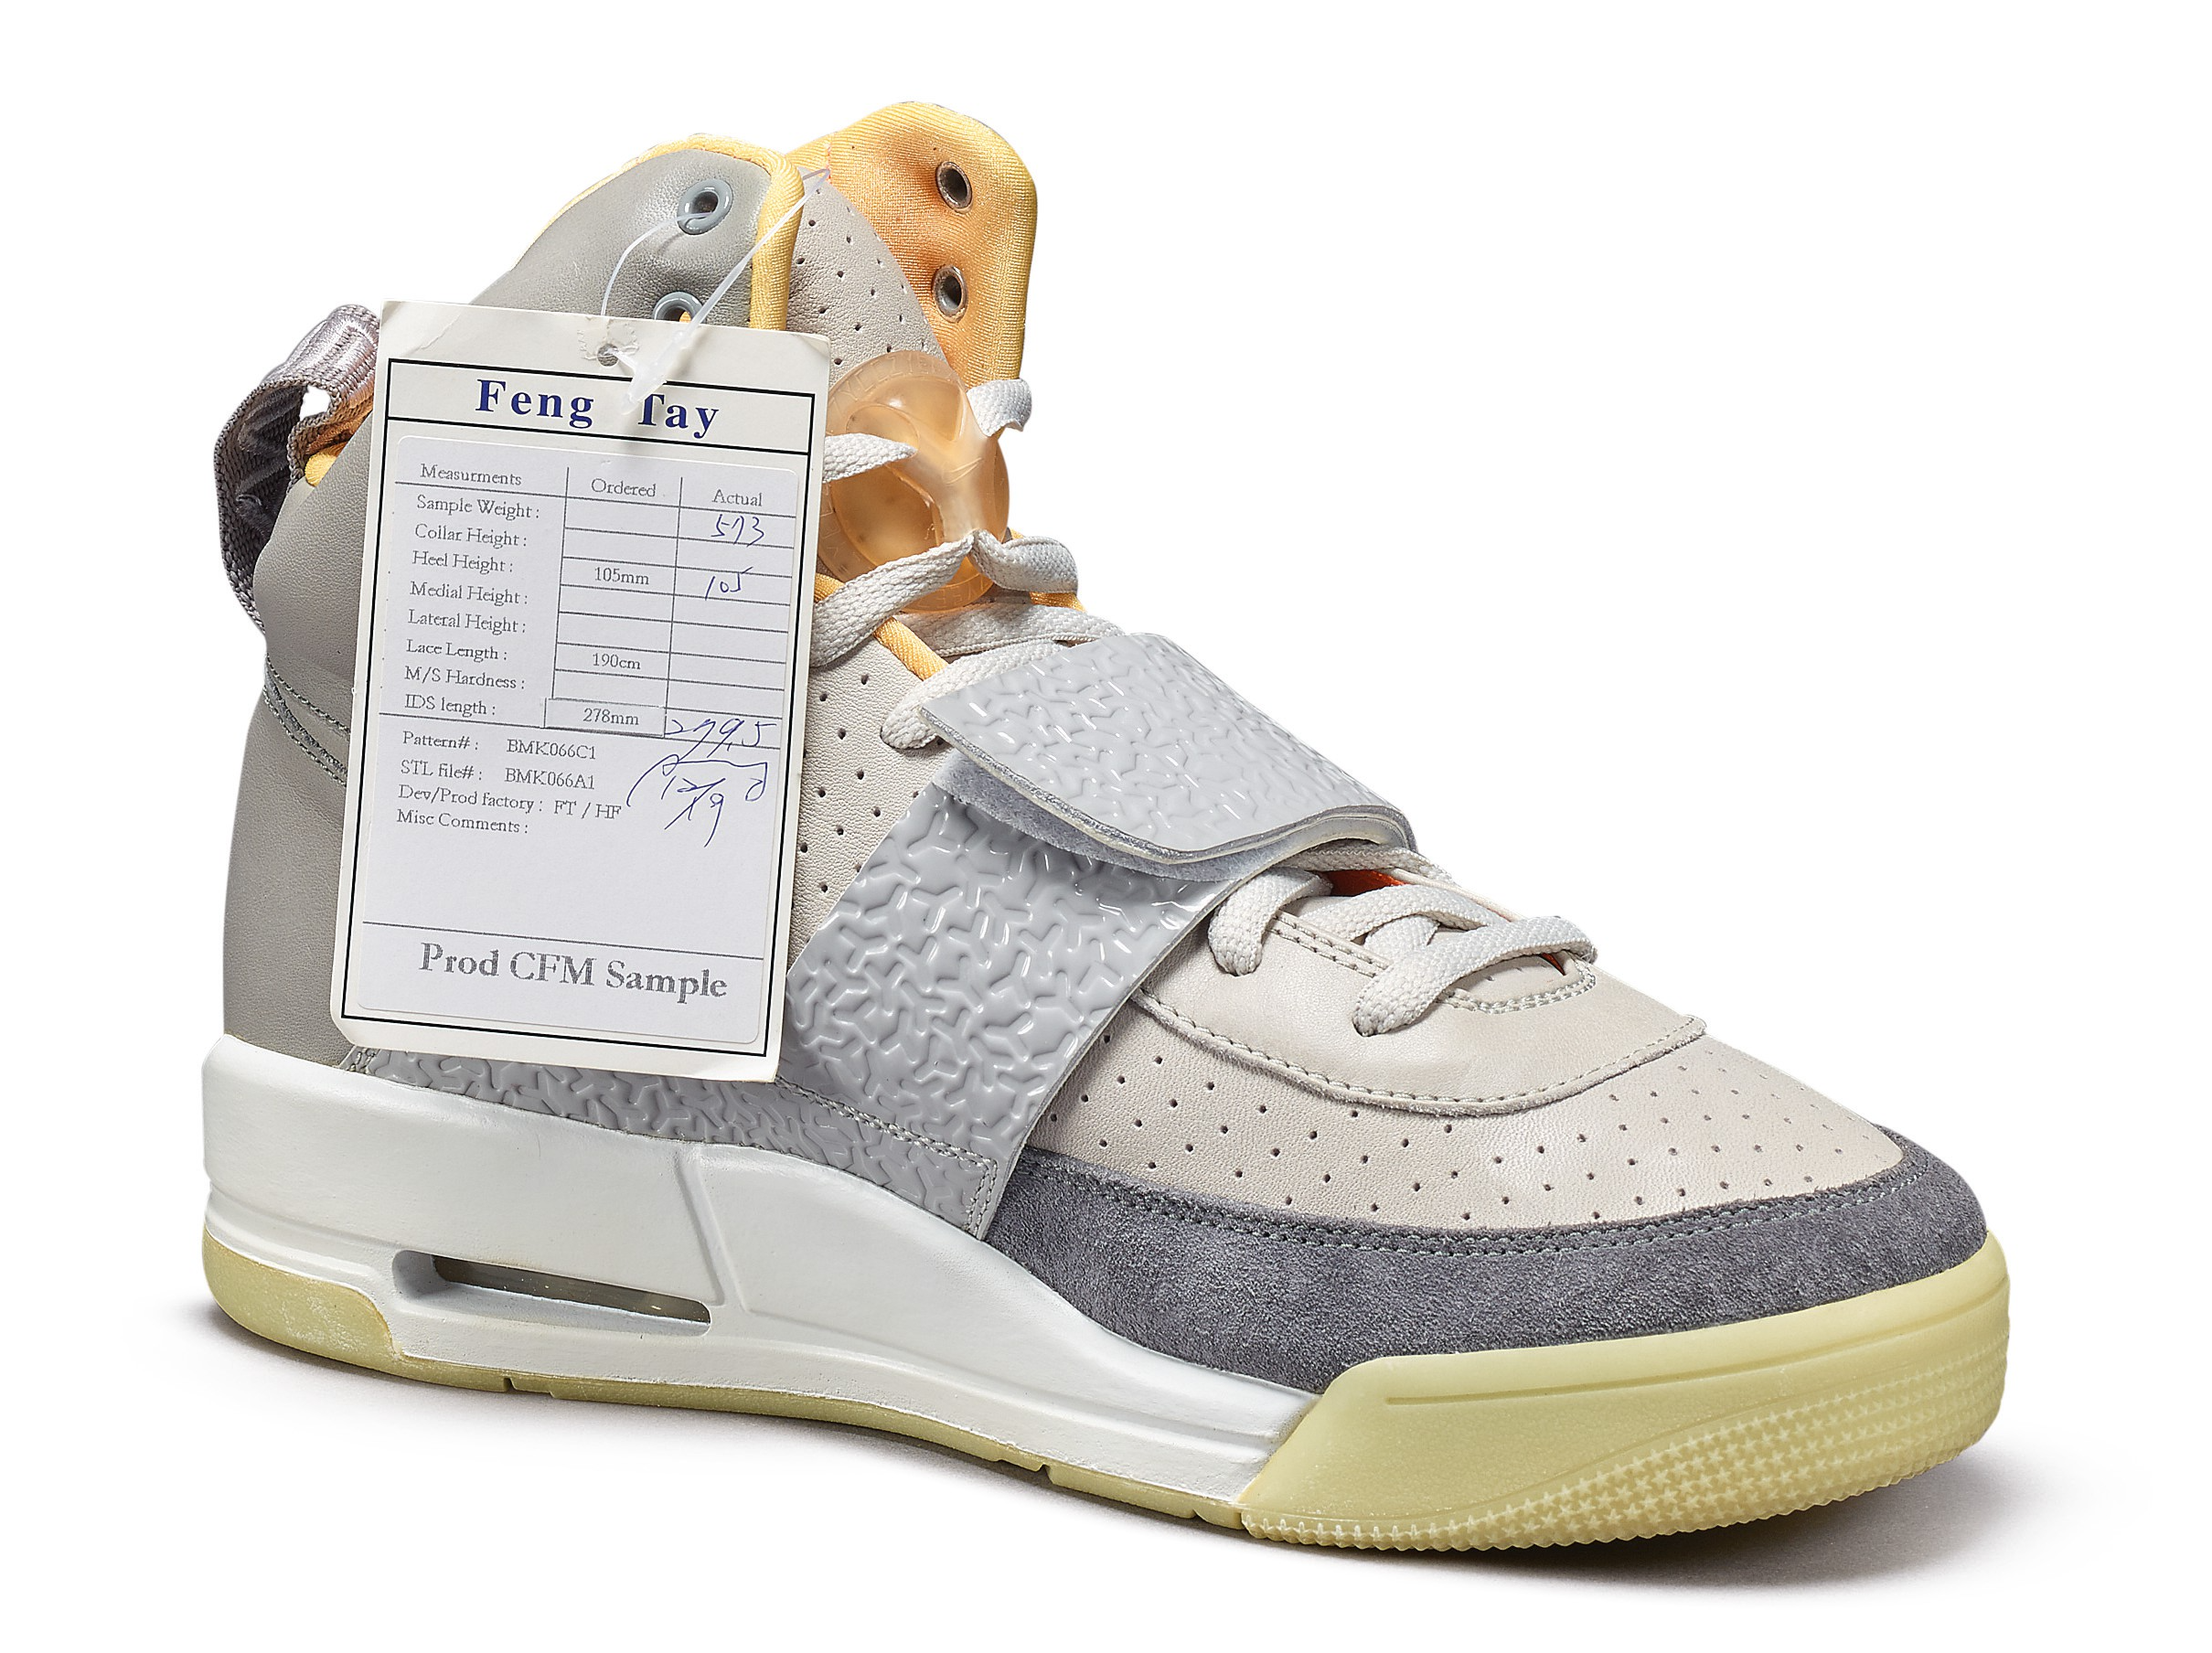 Nike Air Yeezy Grammy Sample Auction Price Fall